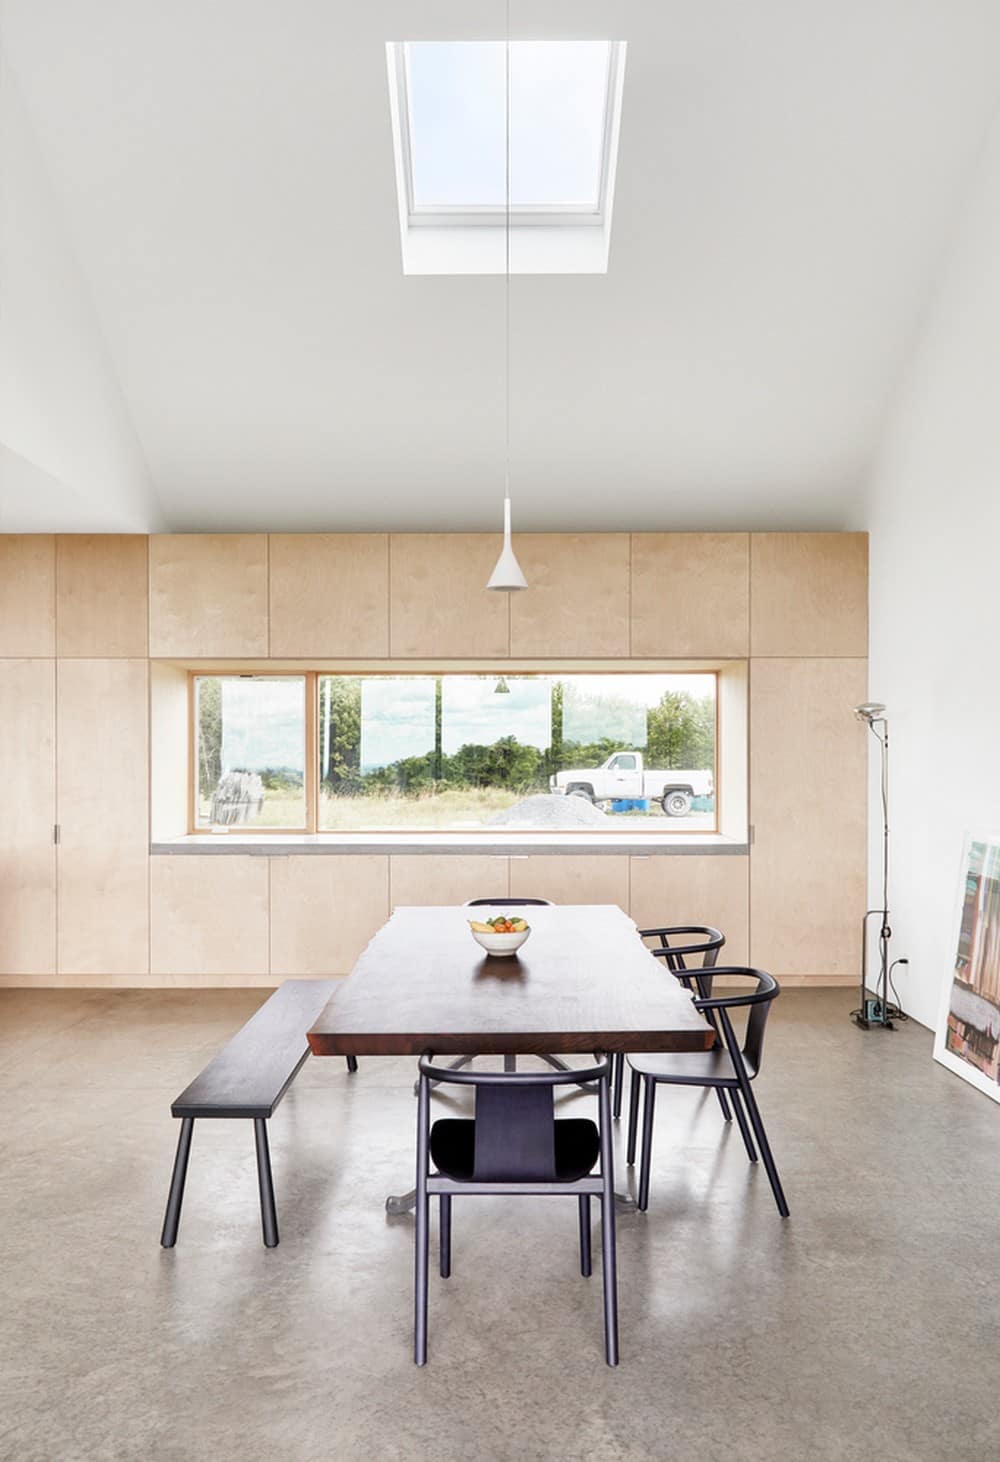 Hass House by Feuerstein Quagliara